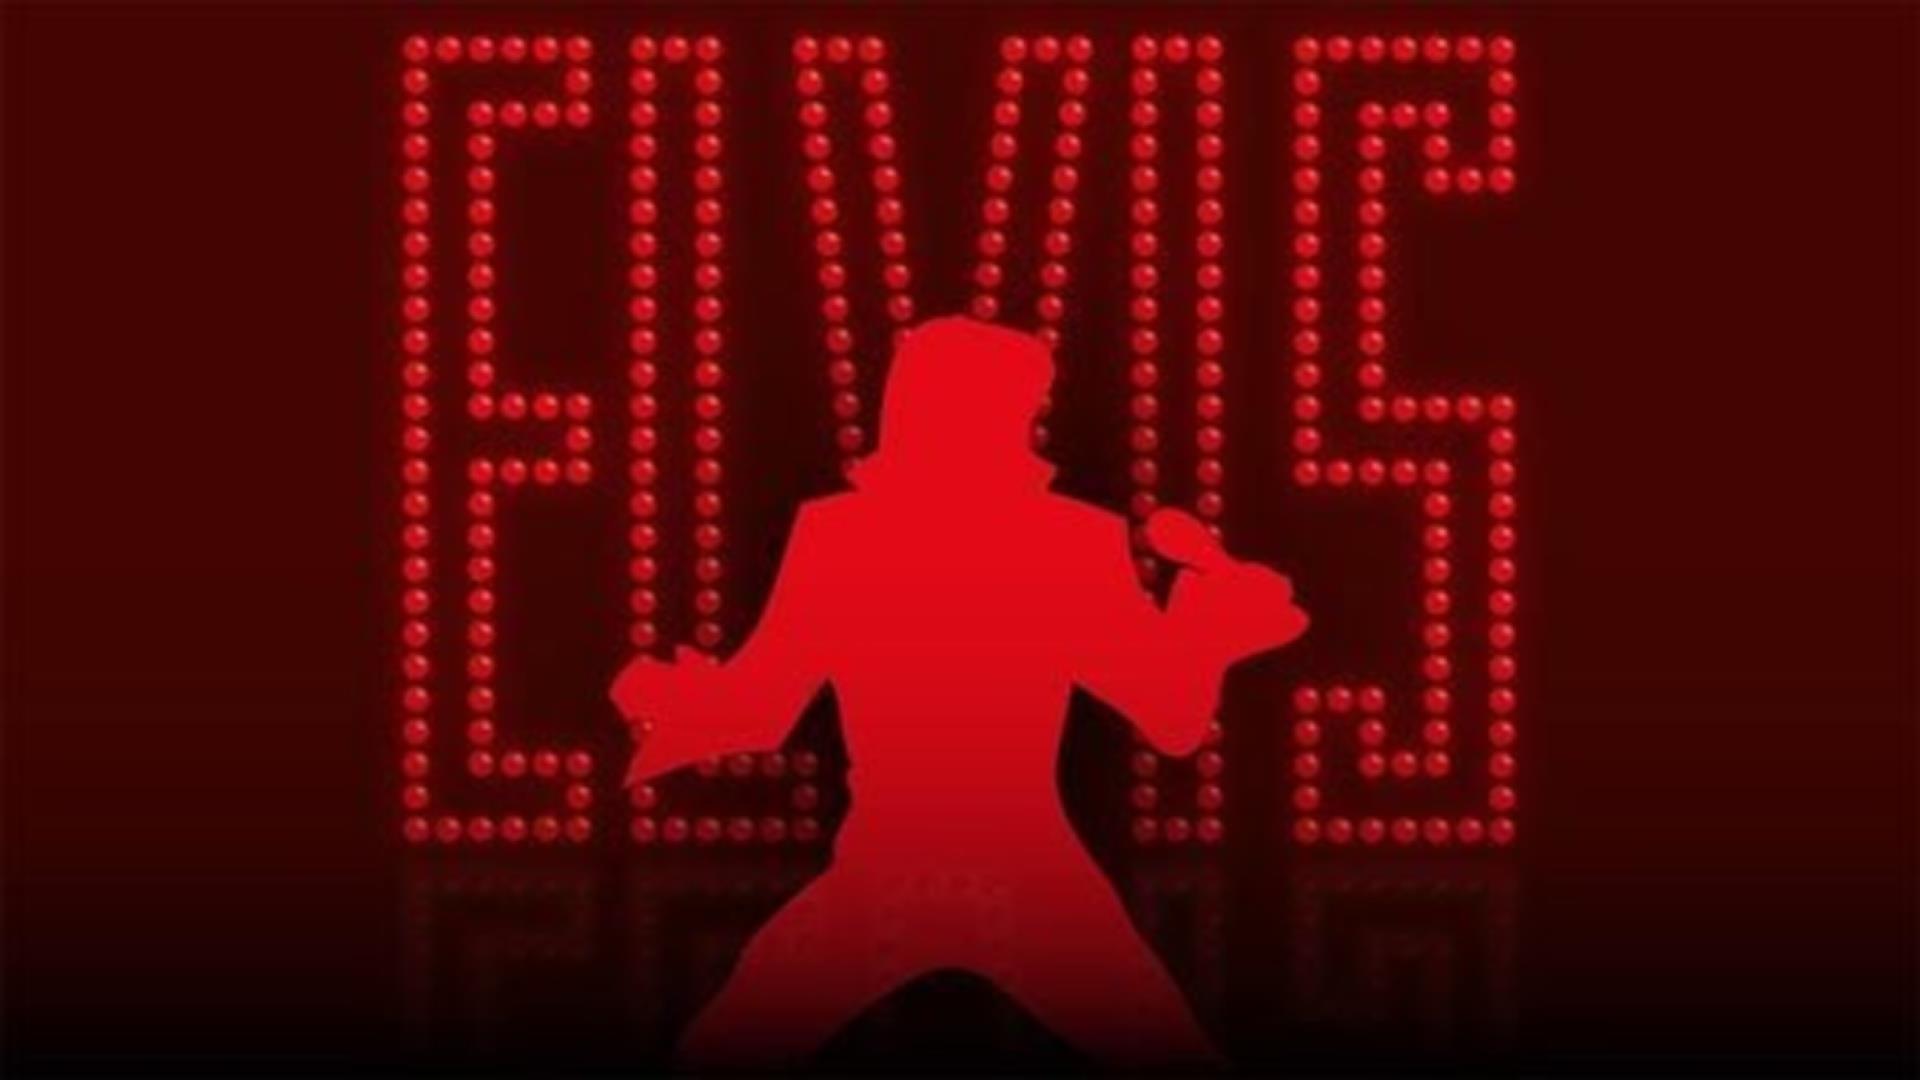 This is a promotional image for the 'Elvis Spectacular Show' event.